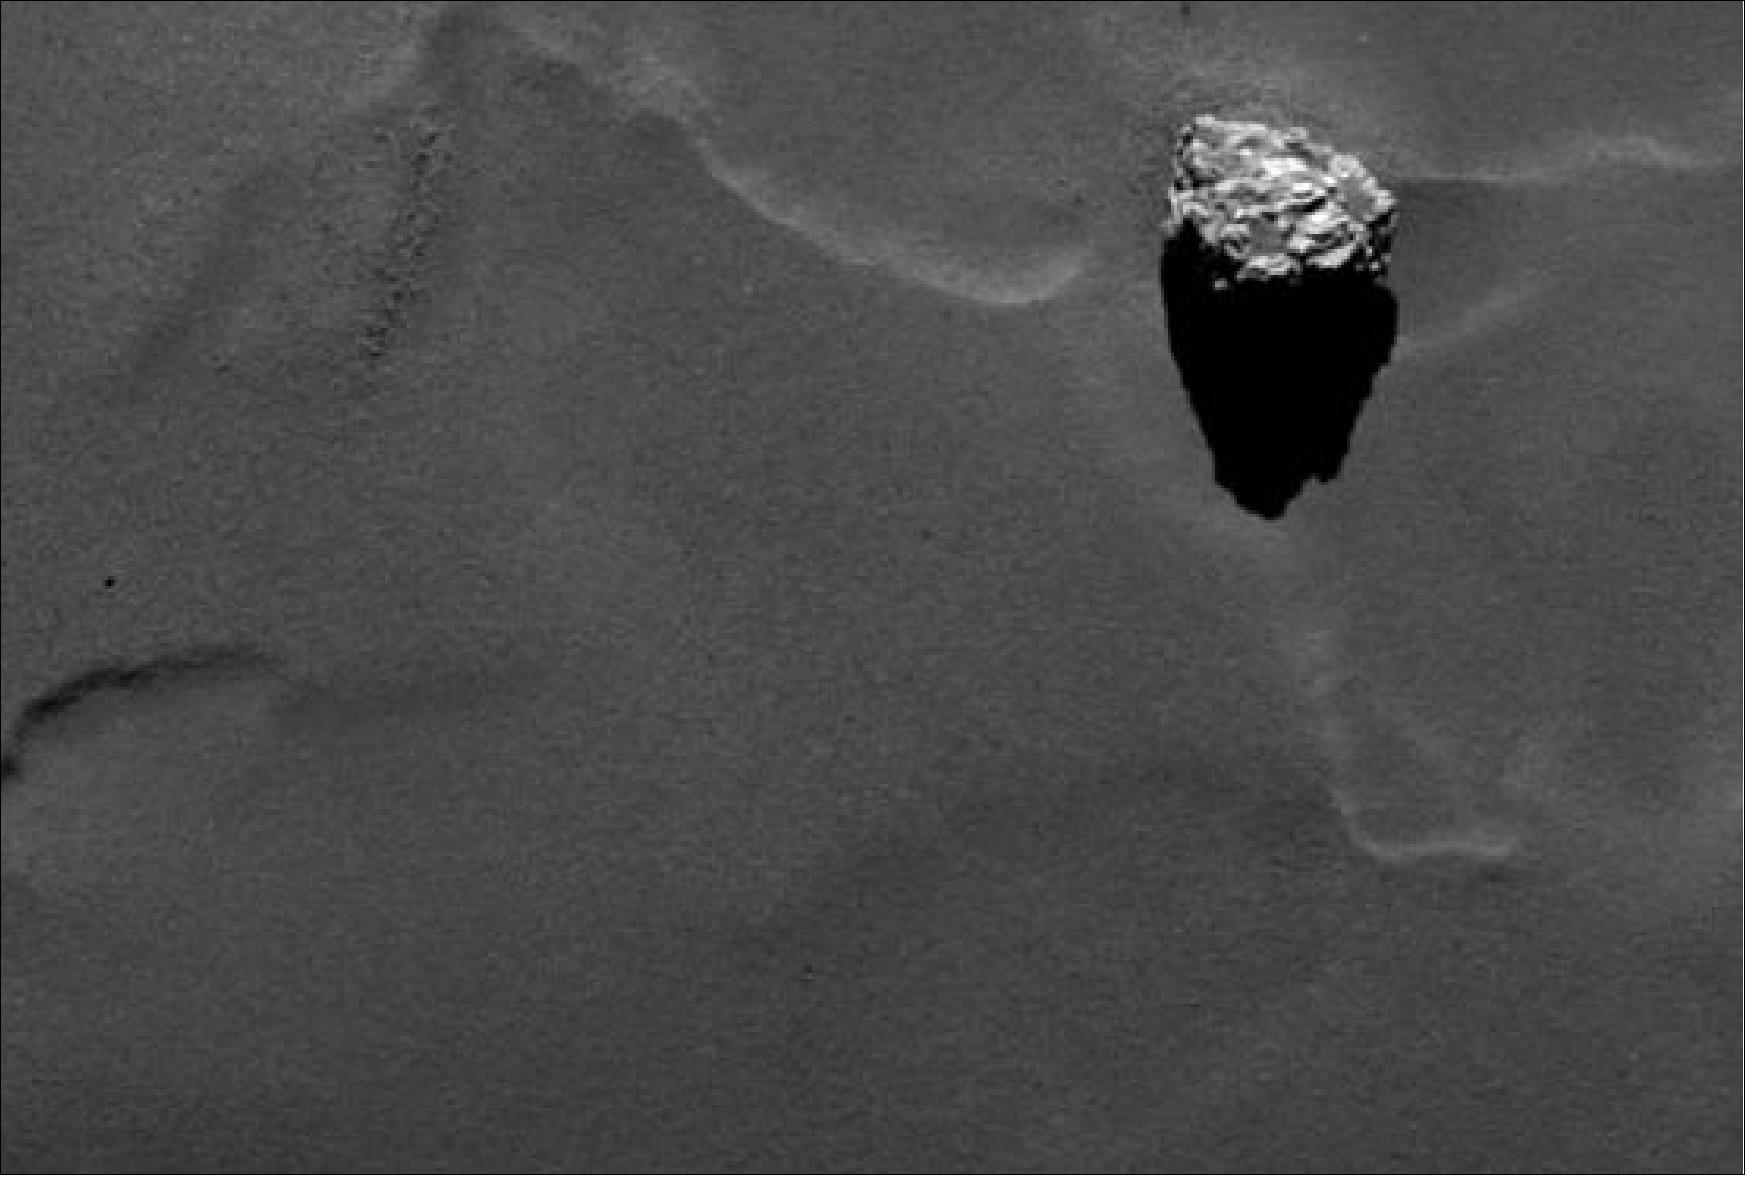 Figure 166: Close-up of the boulder Cheops as it casts a long shadow on the surface of comet 67P/Churyumov-Gerasimenko, (image credit: ESA, Rosetta,MPS for OSIRIS Team MPS, UPD, LAM, IAA, SSO, INTA, UPM, DASP, IDA)